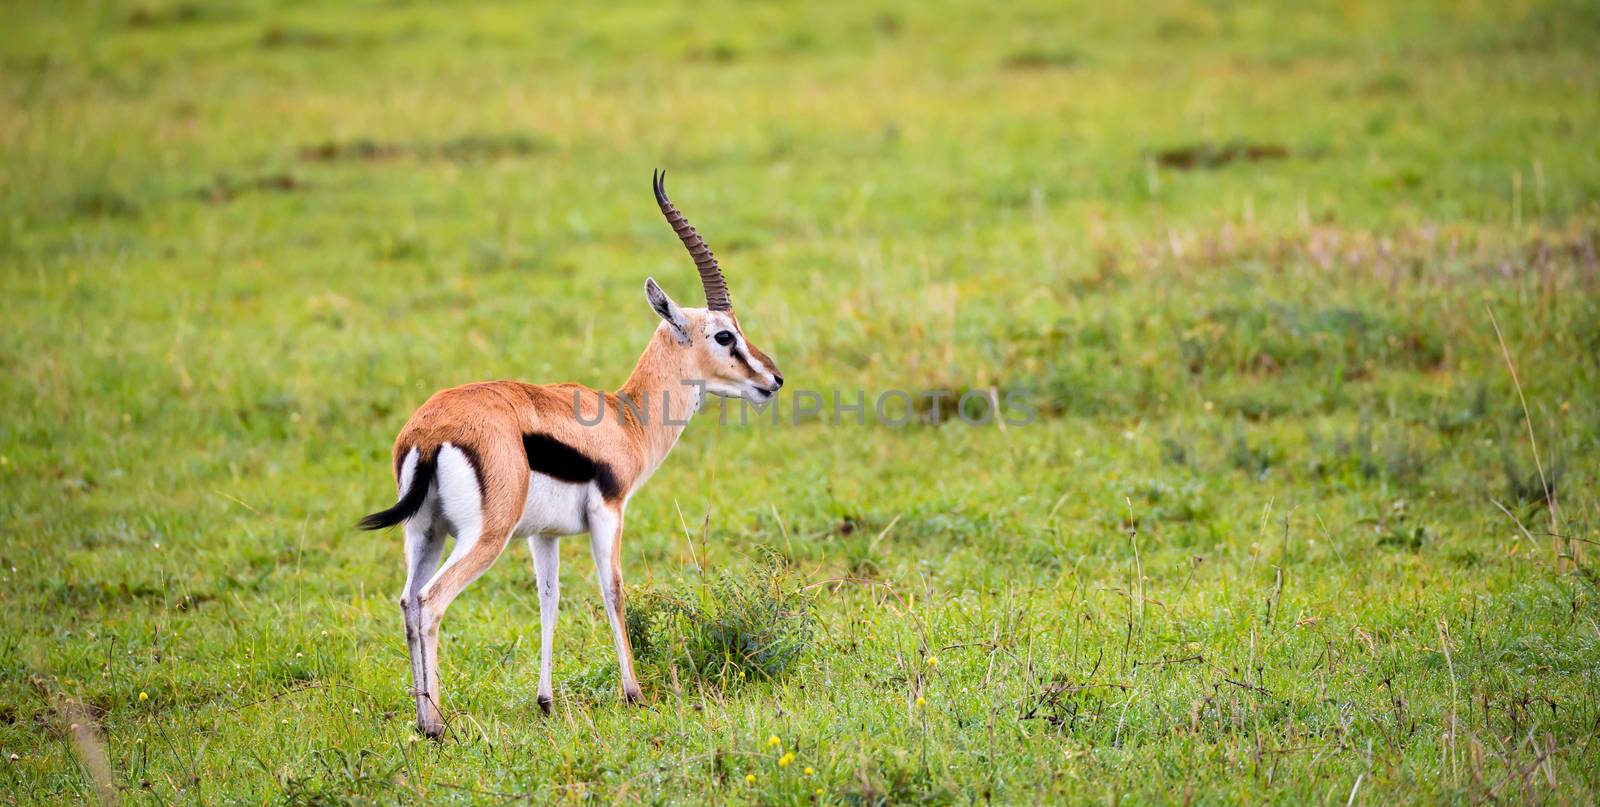 A Thomson's Gazelle in the grass landscape of the savannah in Kenya